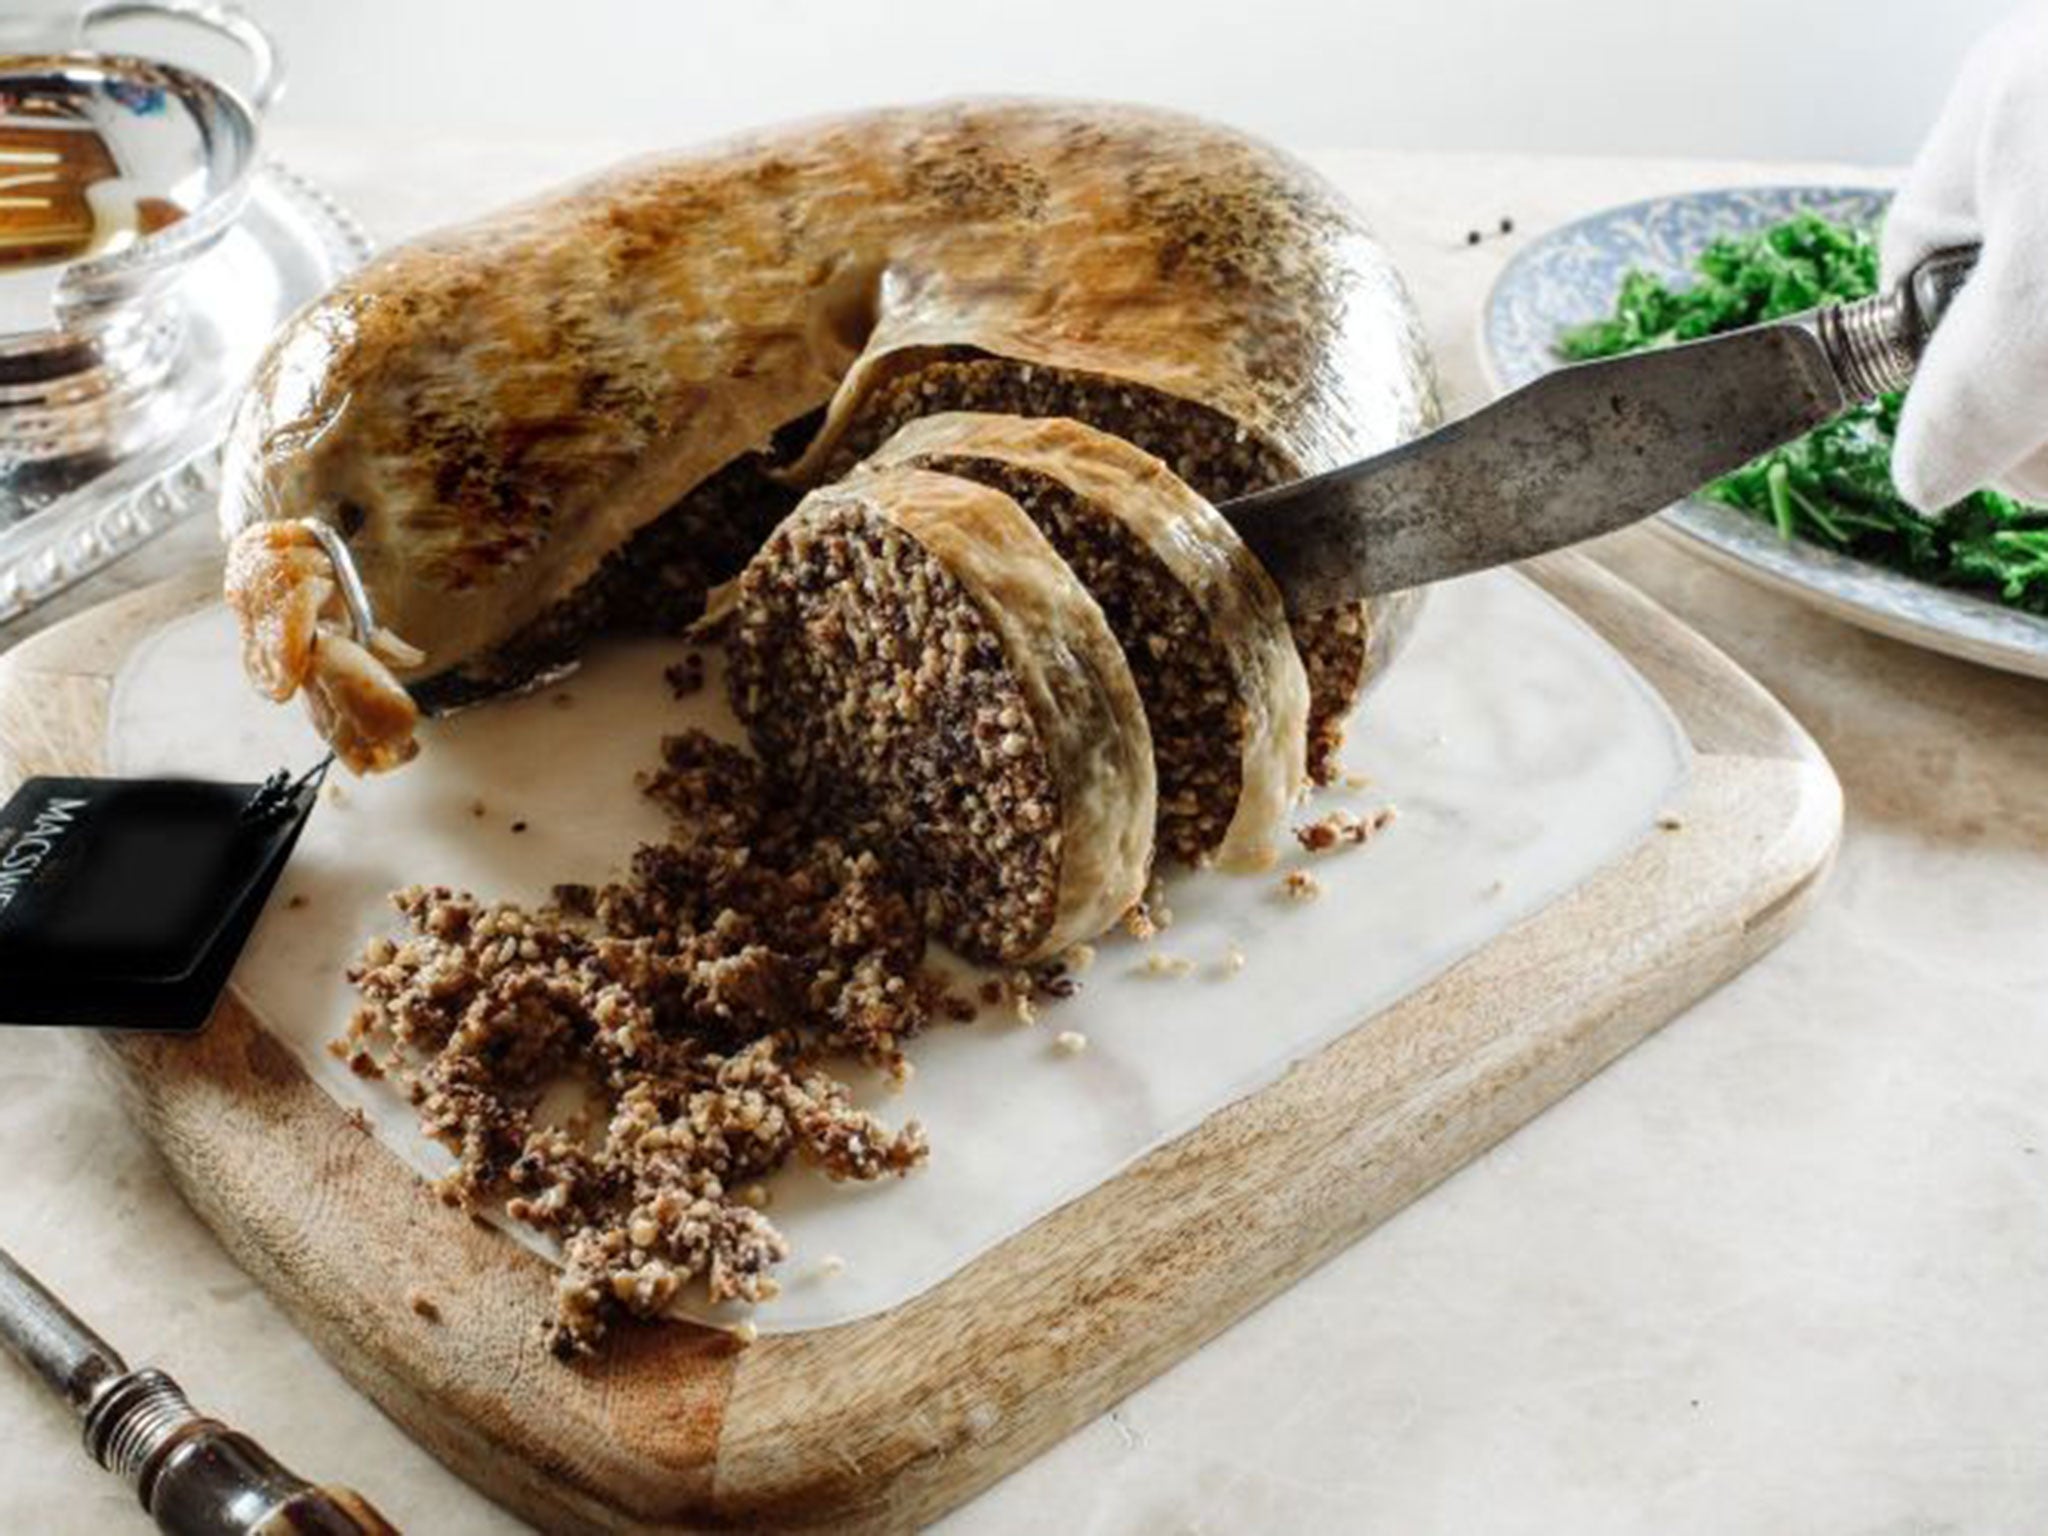 Tasty Haggis will be served at Burns Night dinners